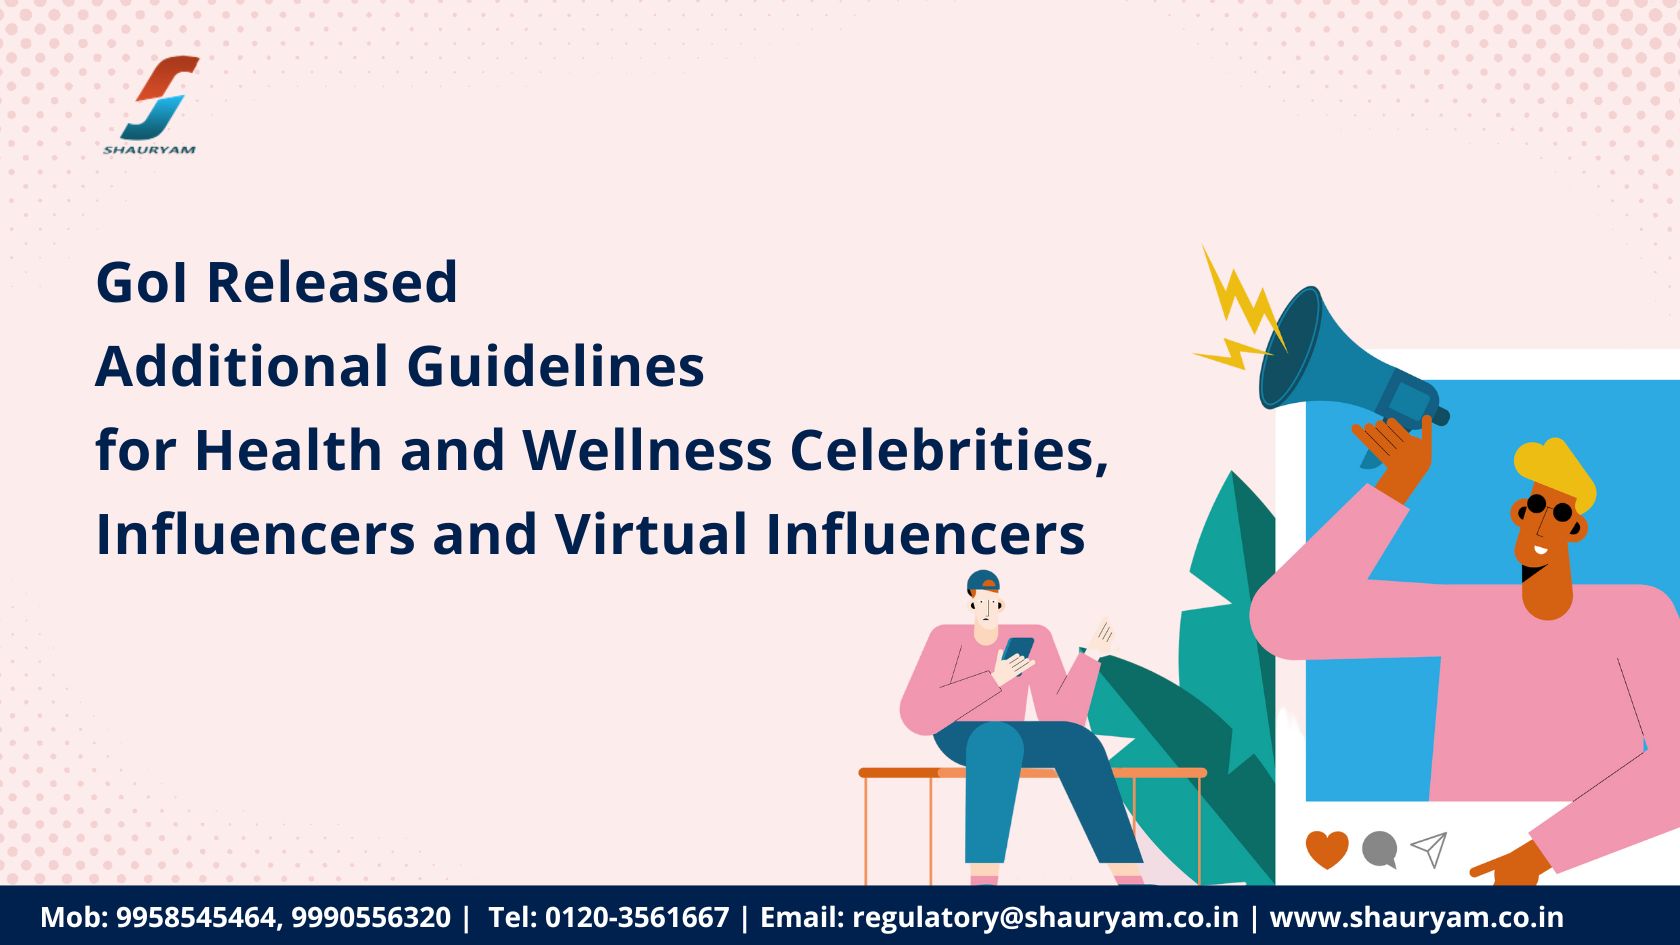 You are currently viewing GoI Released Additional Guidelines for Health and Wellness Influencers